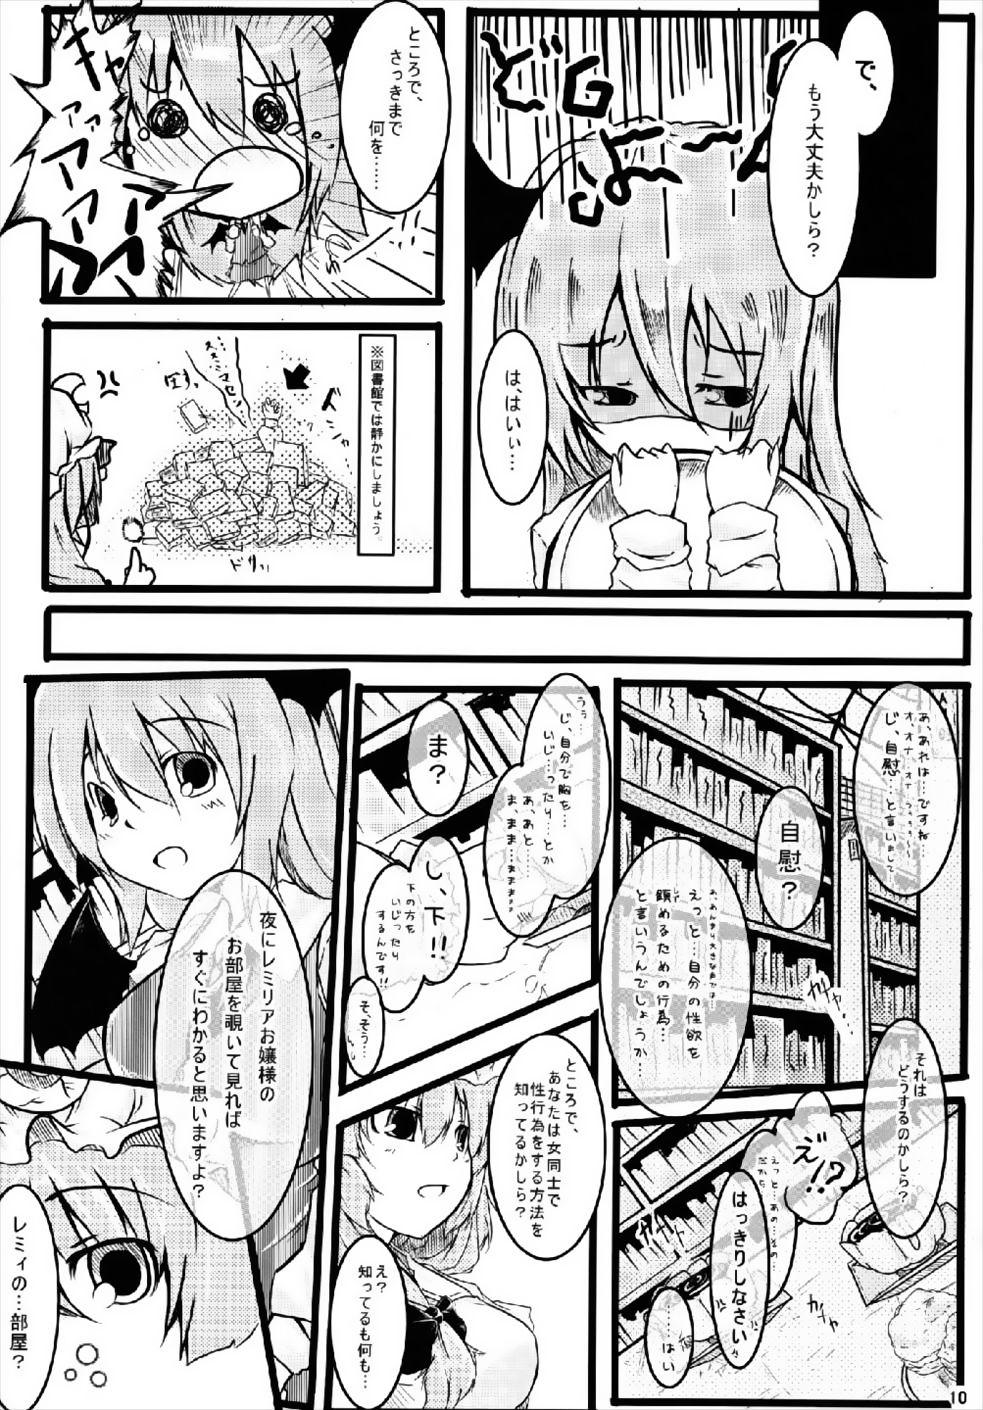 Toilet RemiFlaPatche! - Touhou project Teamskeet - Page 9